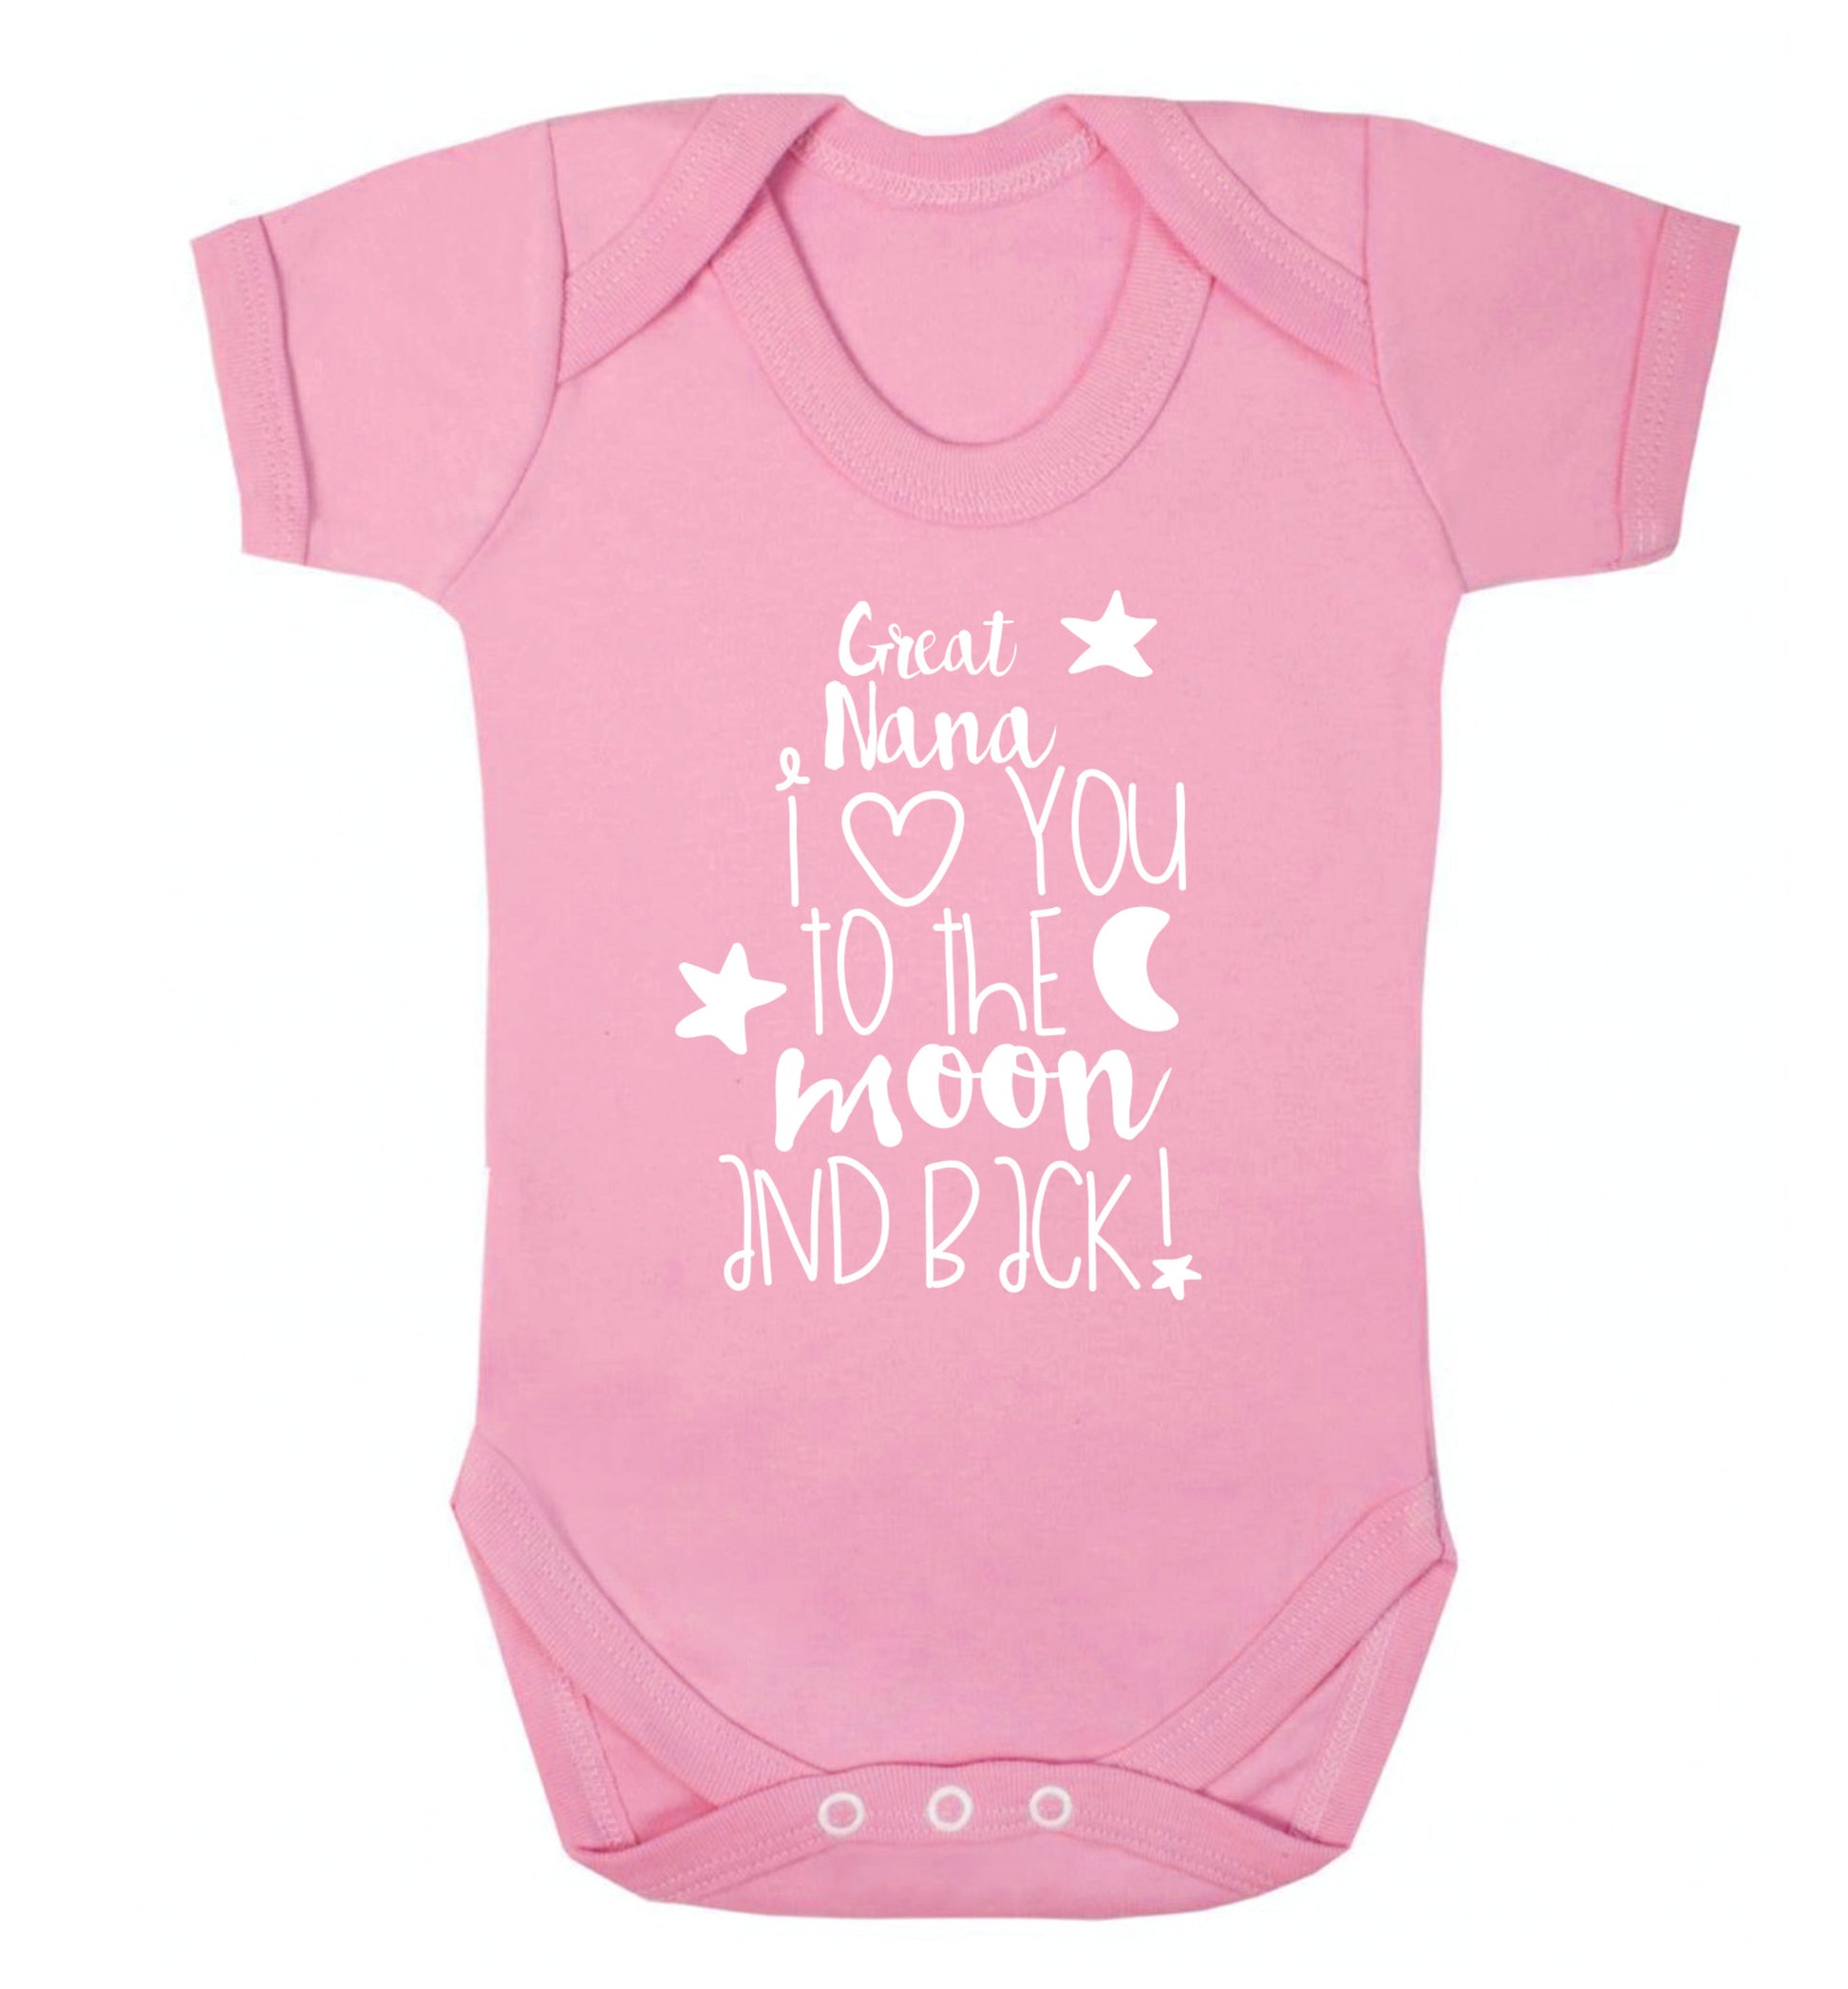 Great Nana I love you to the moon and back Baby Vest pale pink 18-24 months